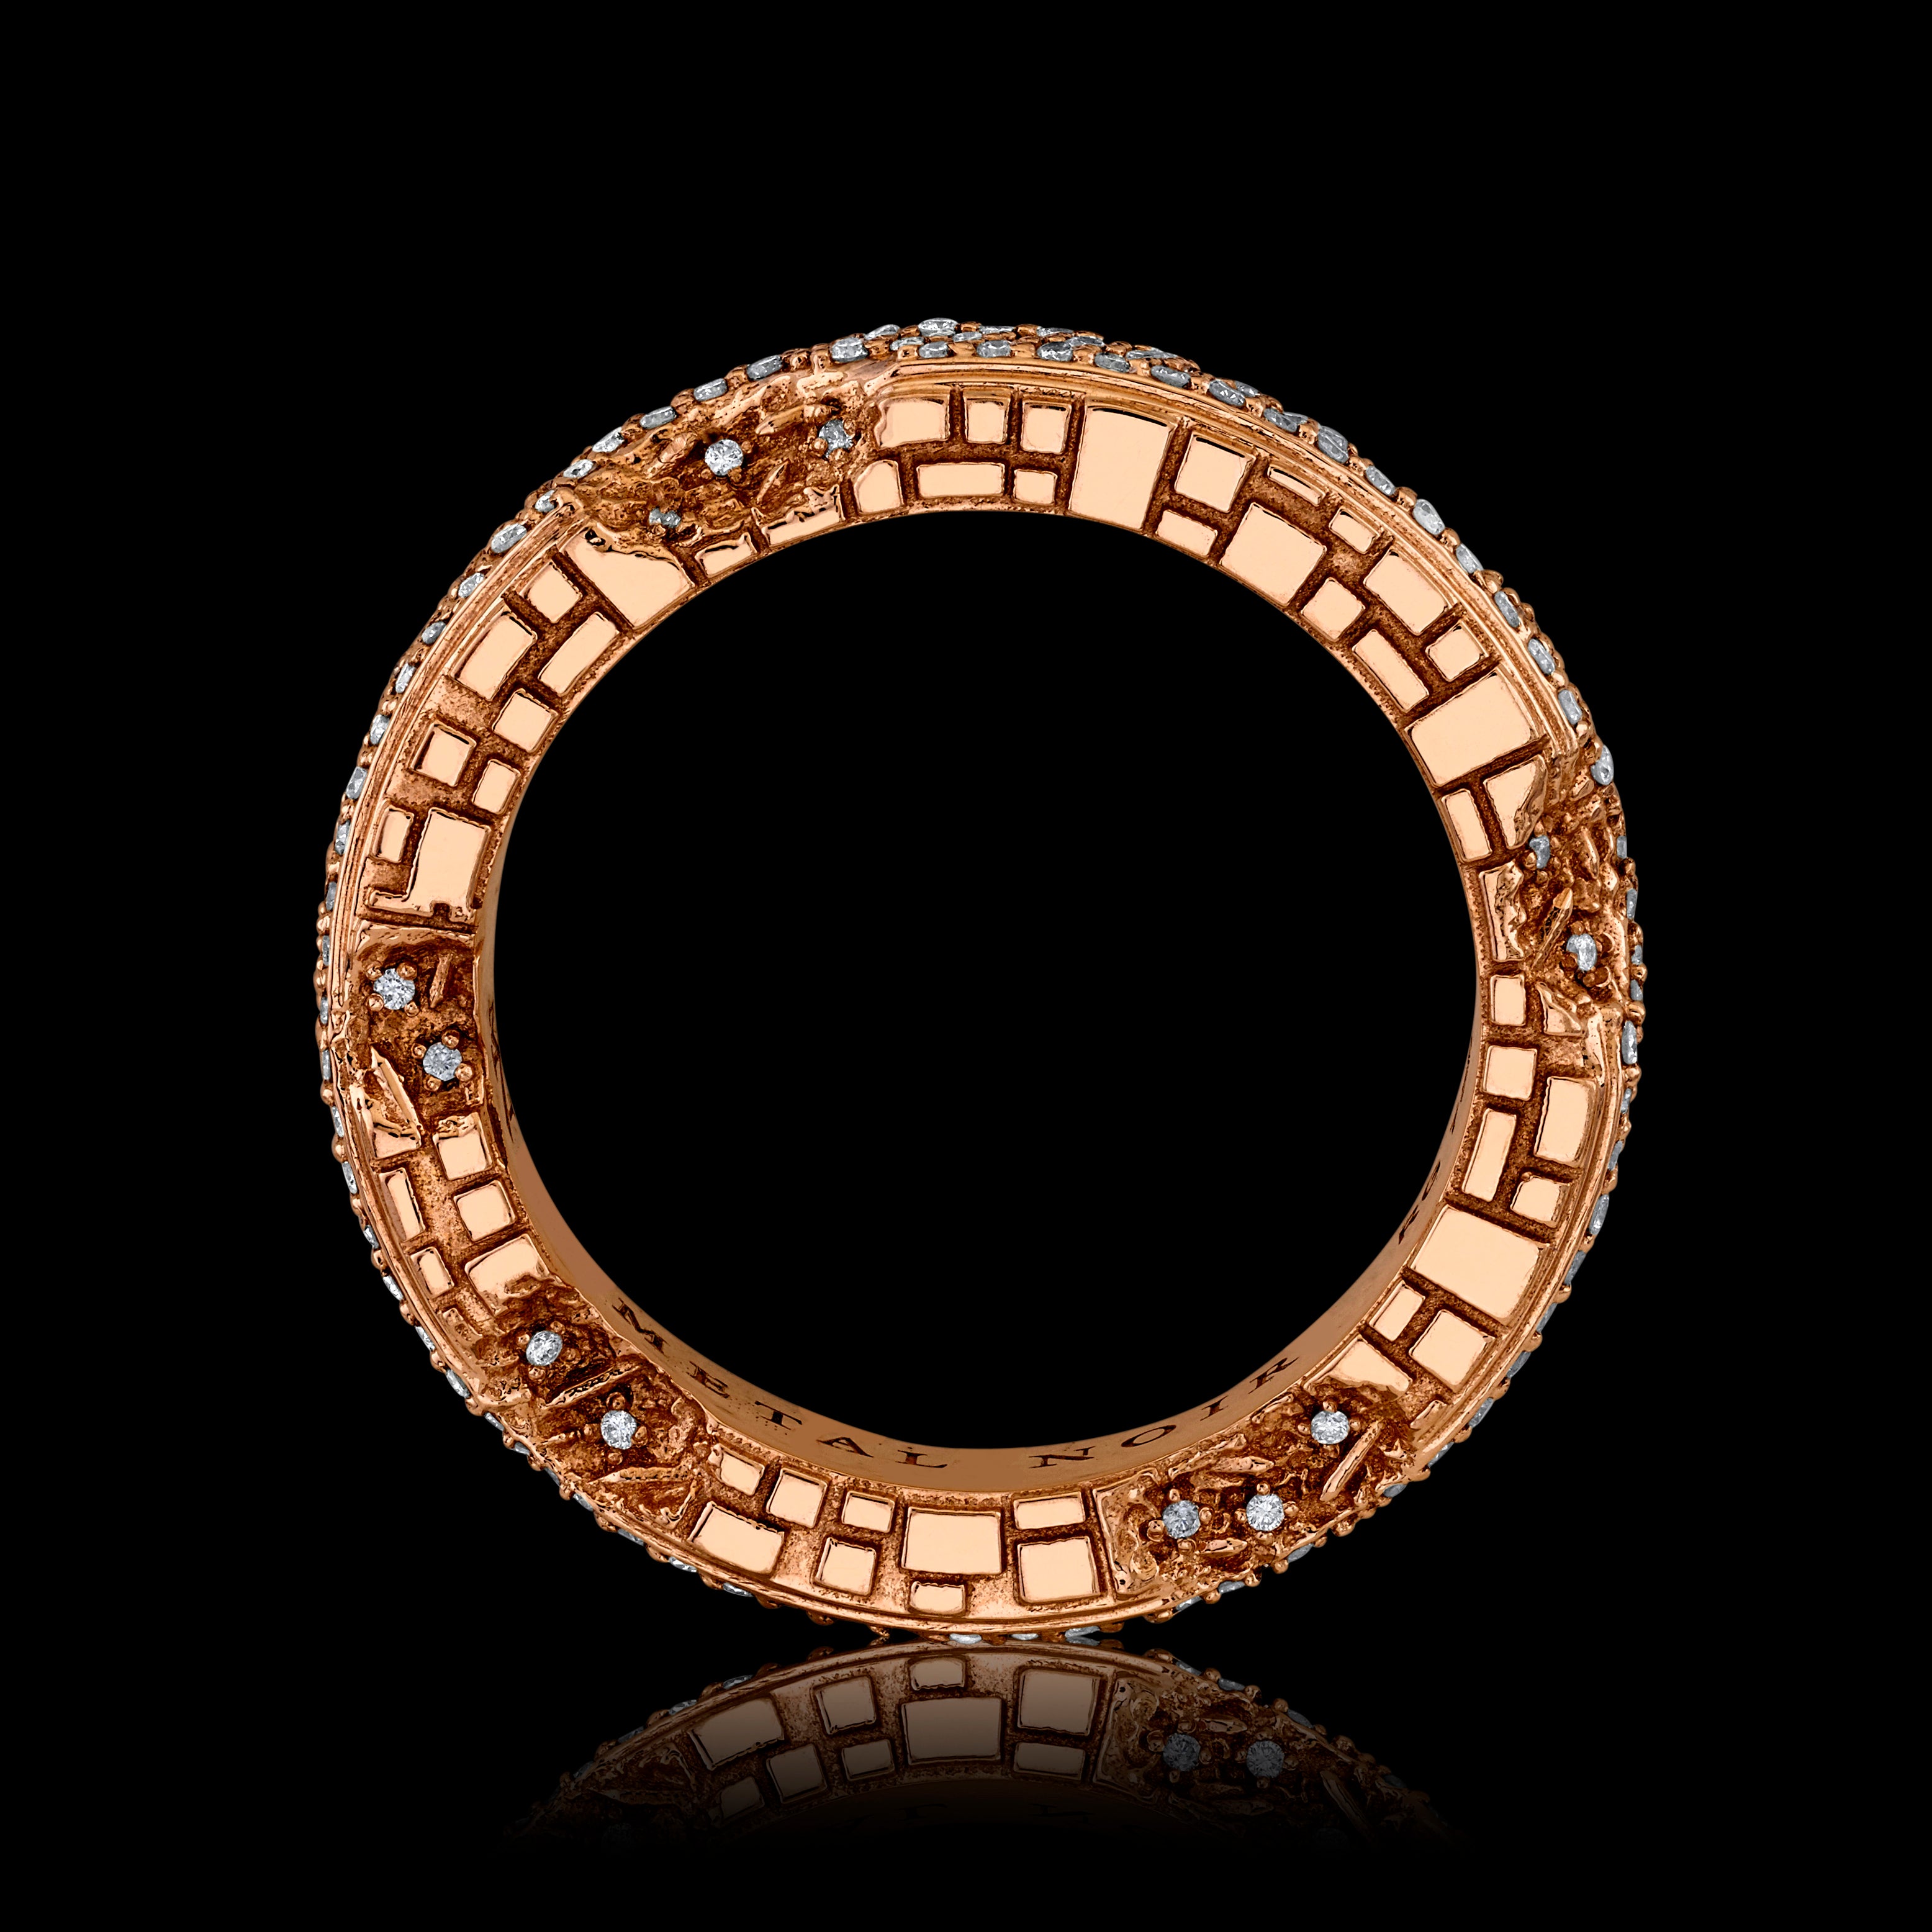 ‘Eroded Architecture’ Ring in solid 18k rose gold with pave set round brilliant diamonds • Edition of 30